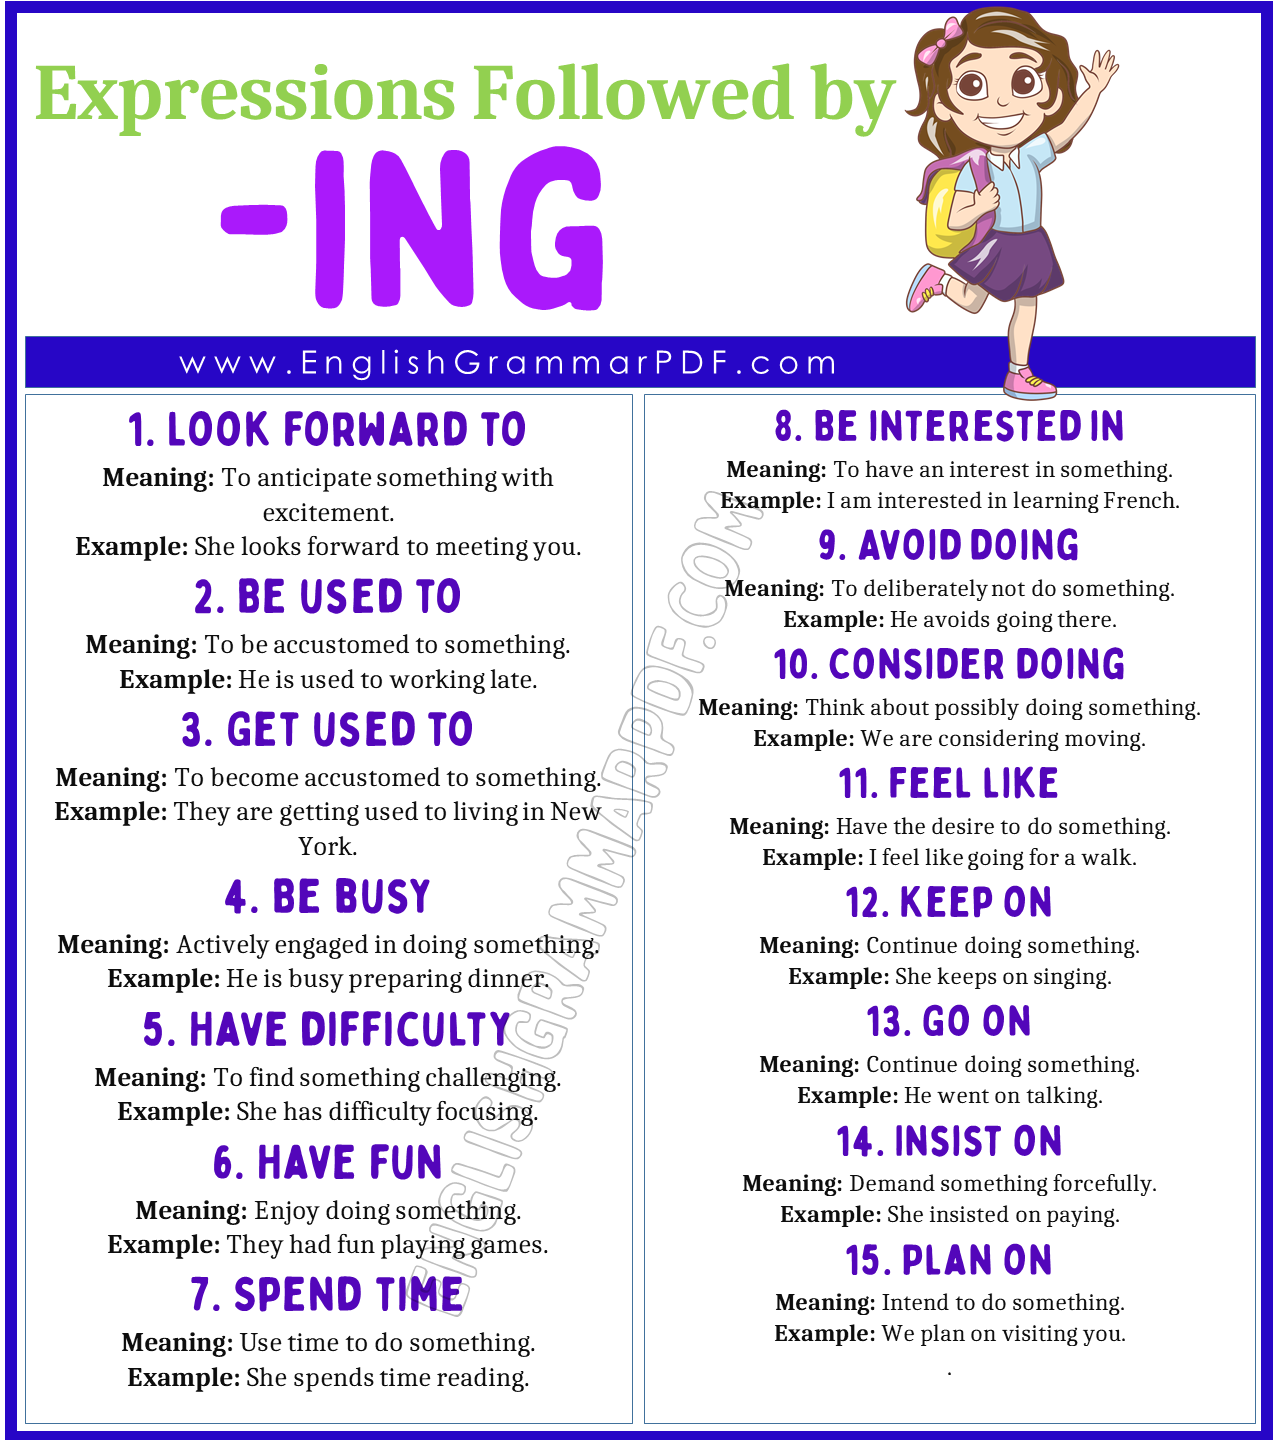 Expressions Followed by ing